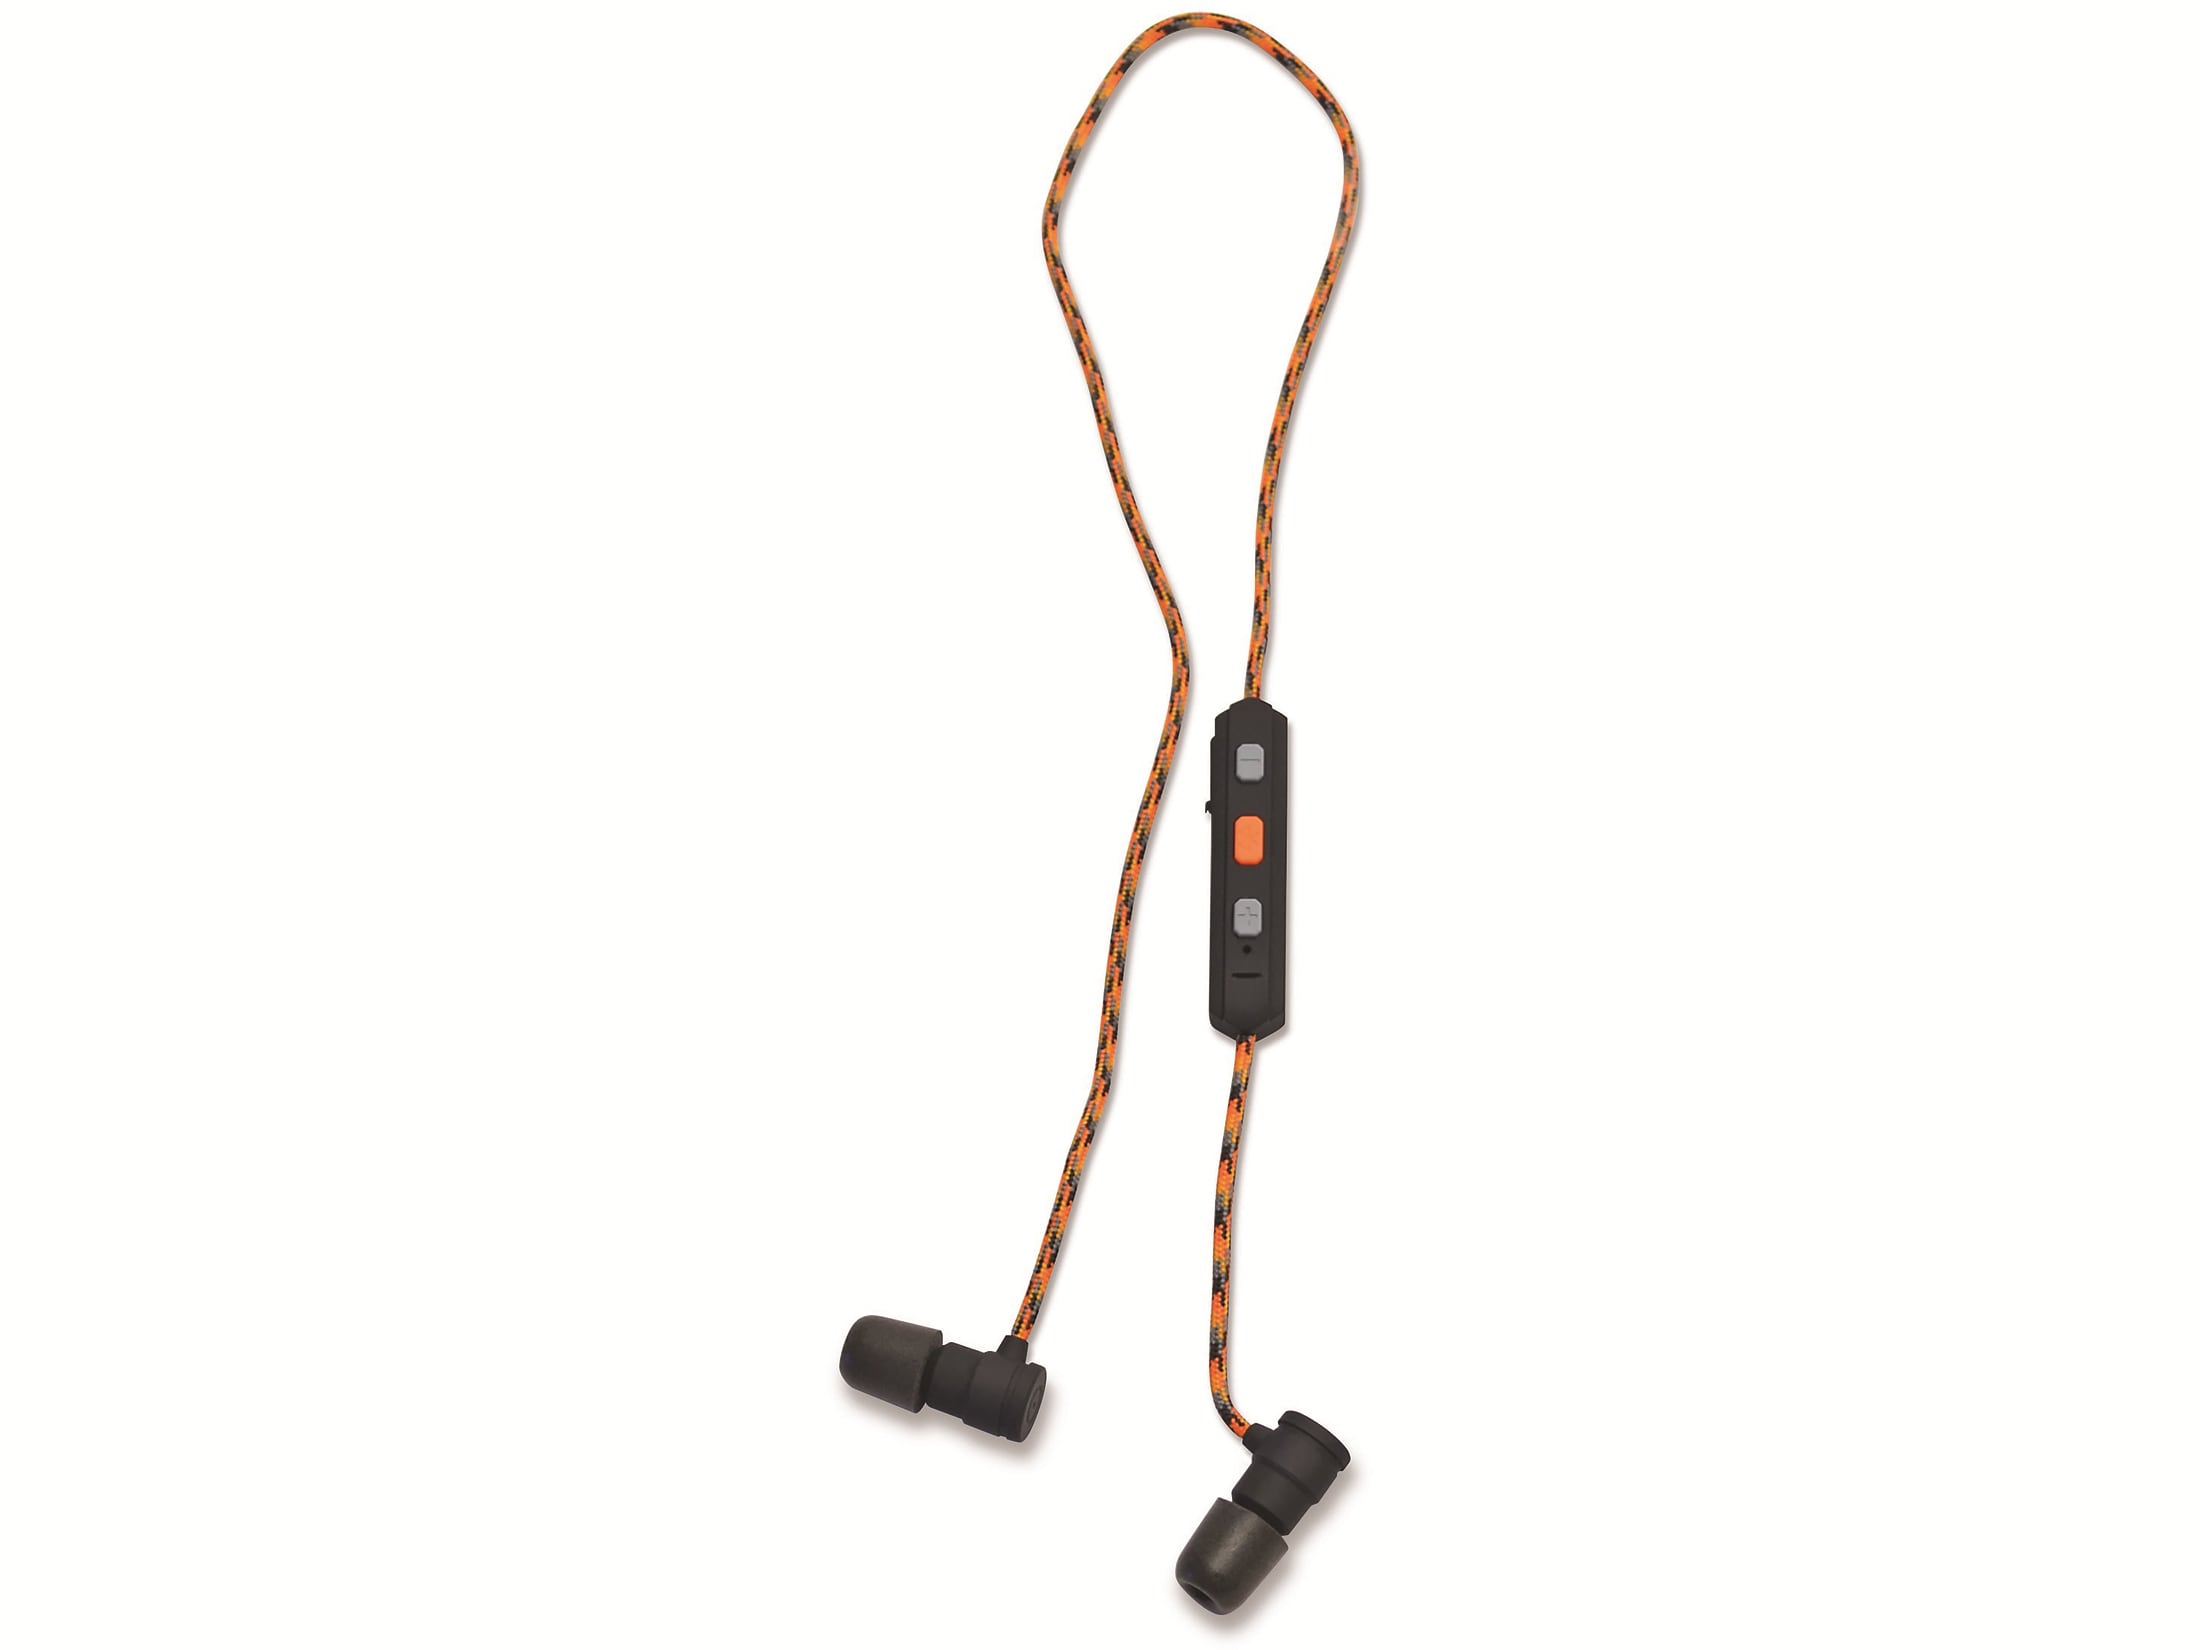 Walkers Rope Hearing Enhancer W Bluetooth M1127281 for sale online 